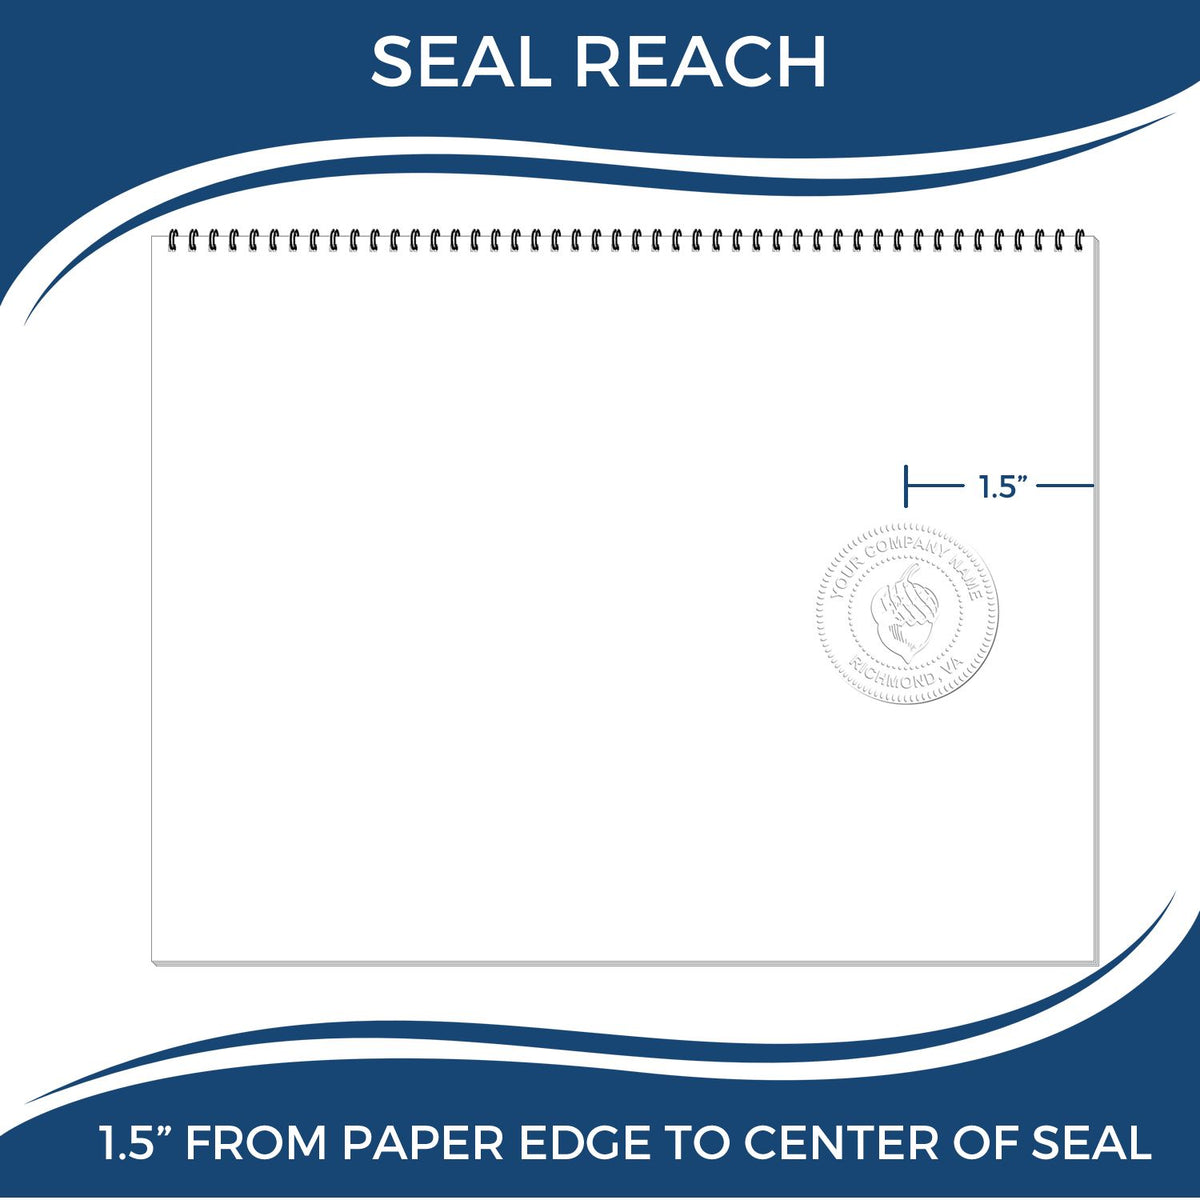 An infographic showing the seal reach which is represented by a ruler and a miniature seal image of the Hybrid Guam Geologist Seal